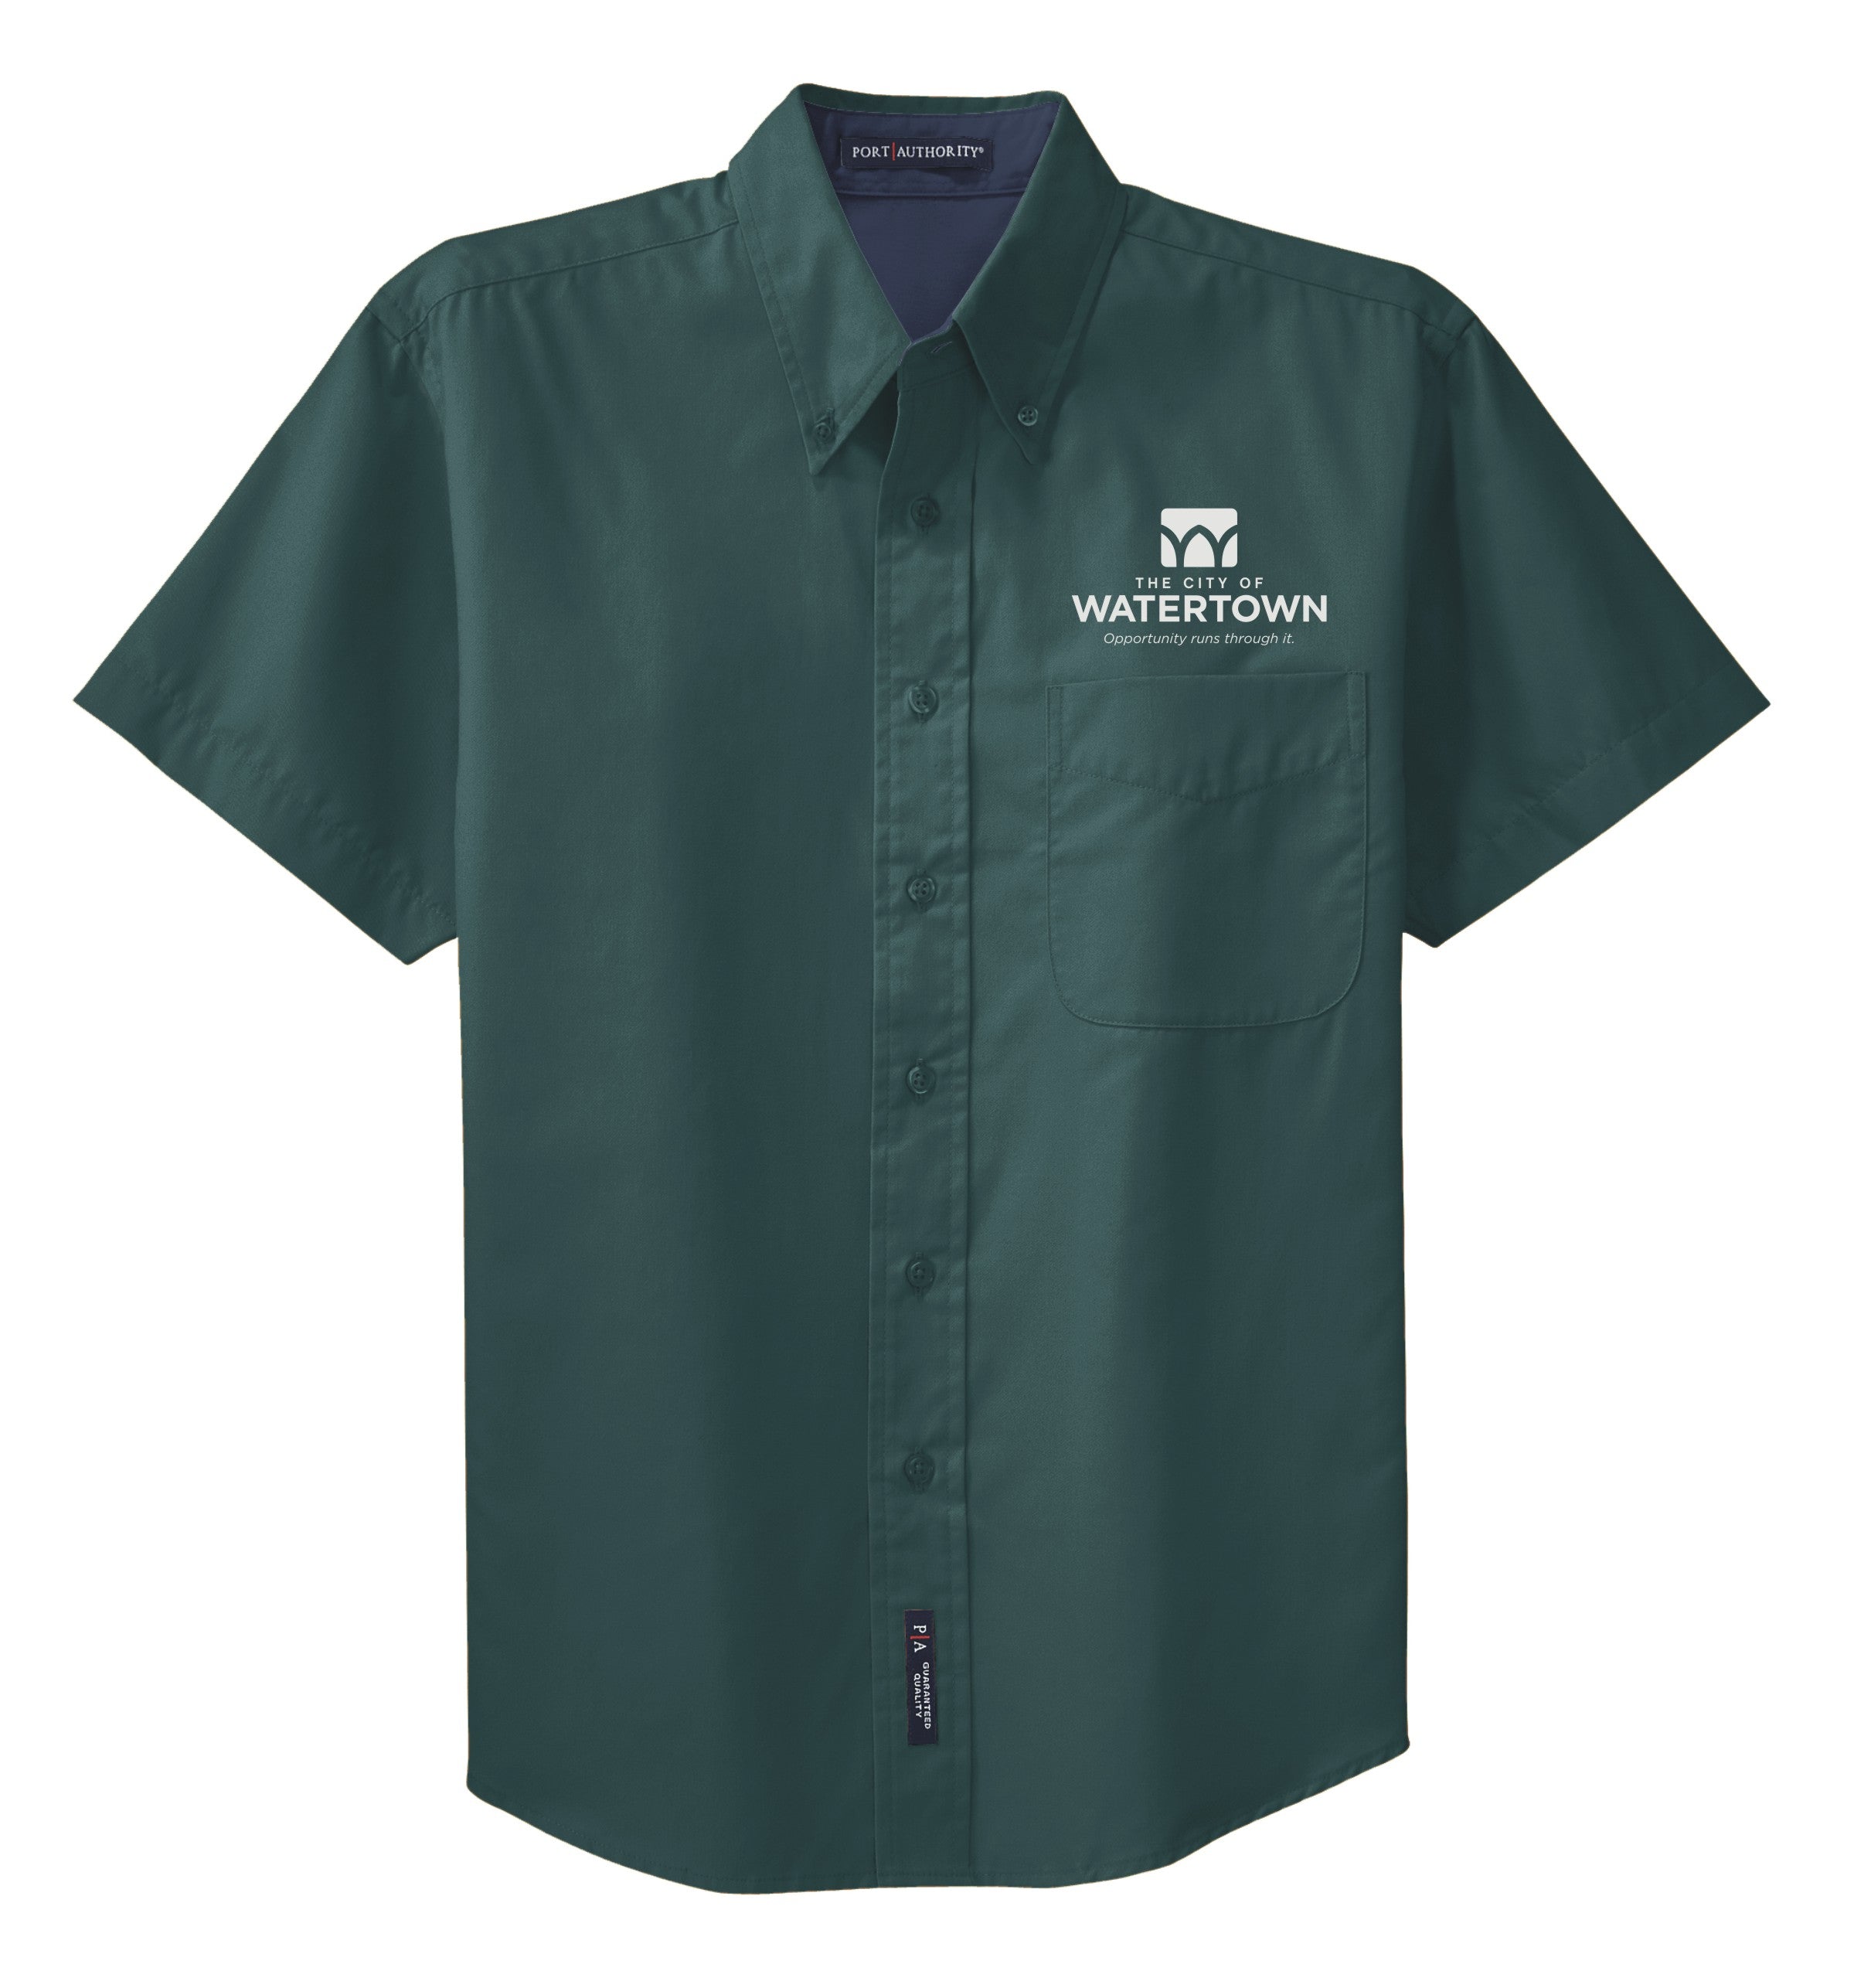 City of Watertown Mens Short Sleeve Easy Care Shirt